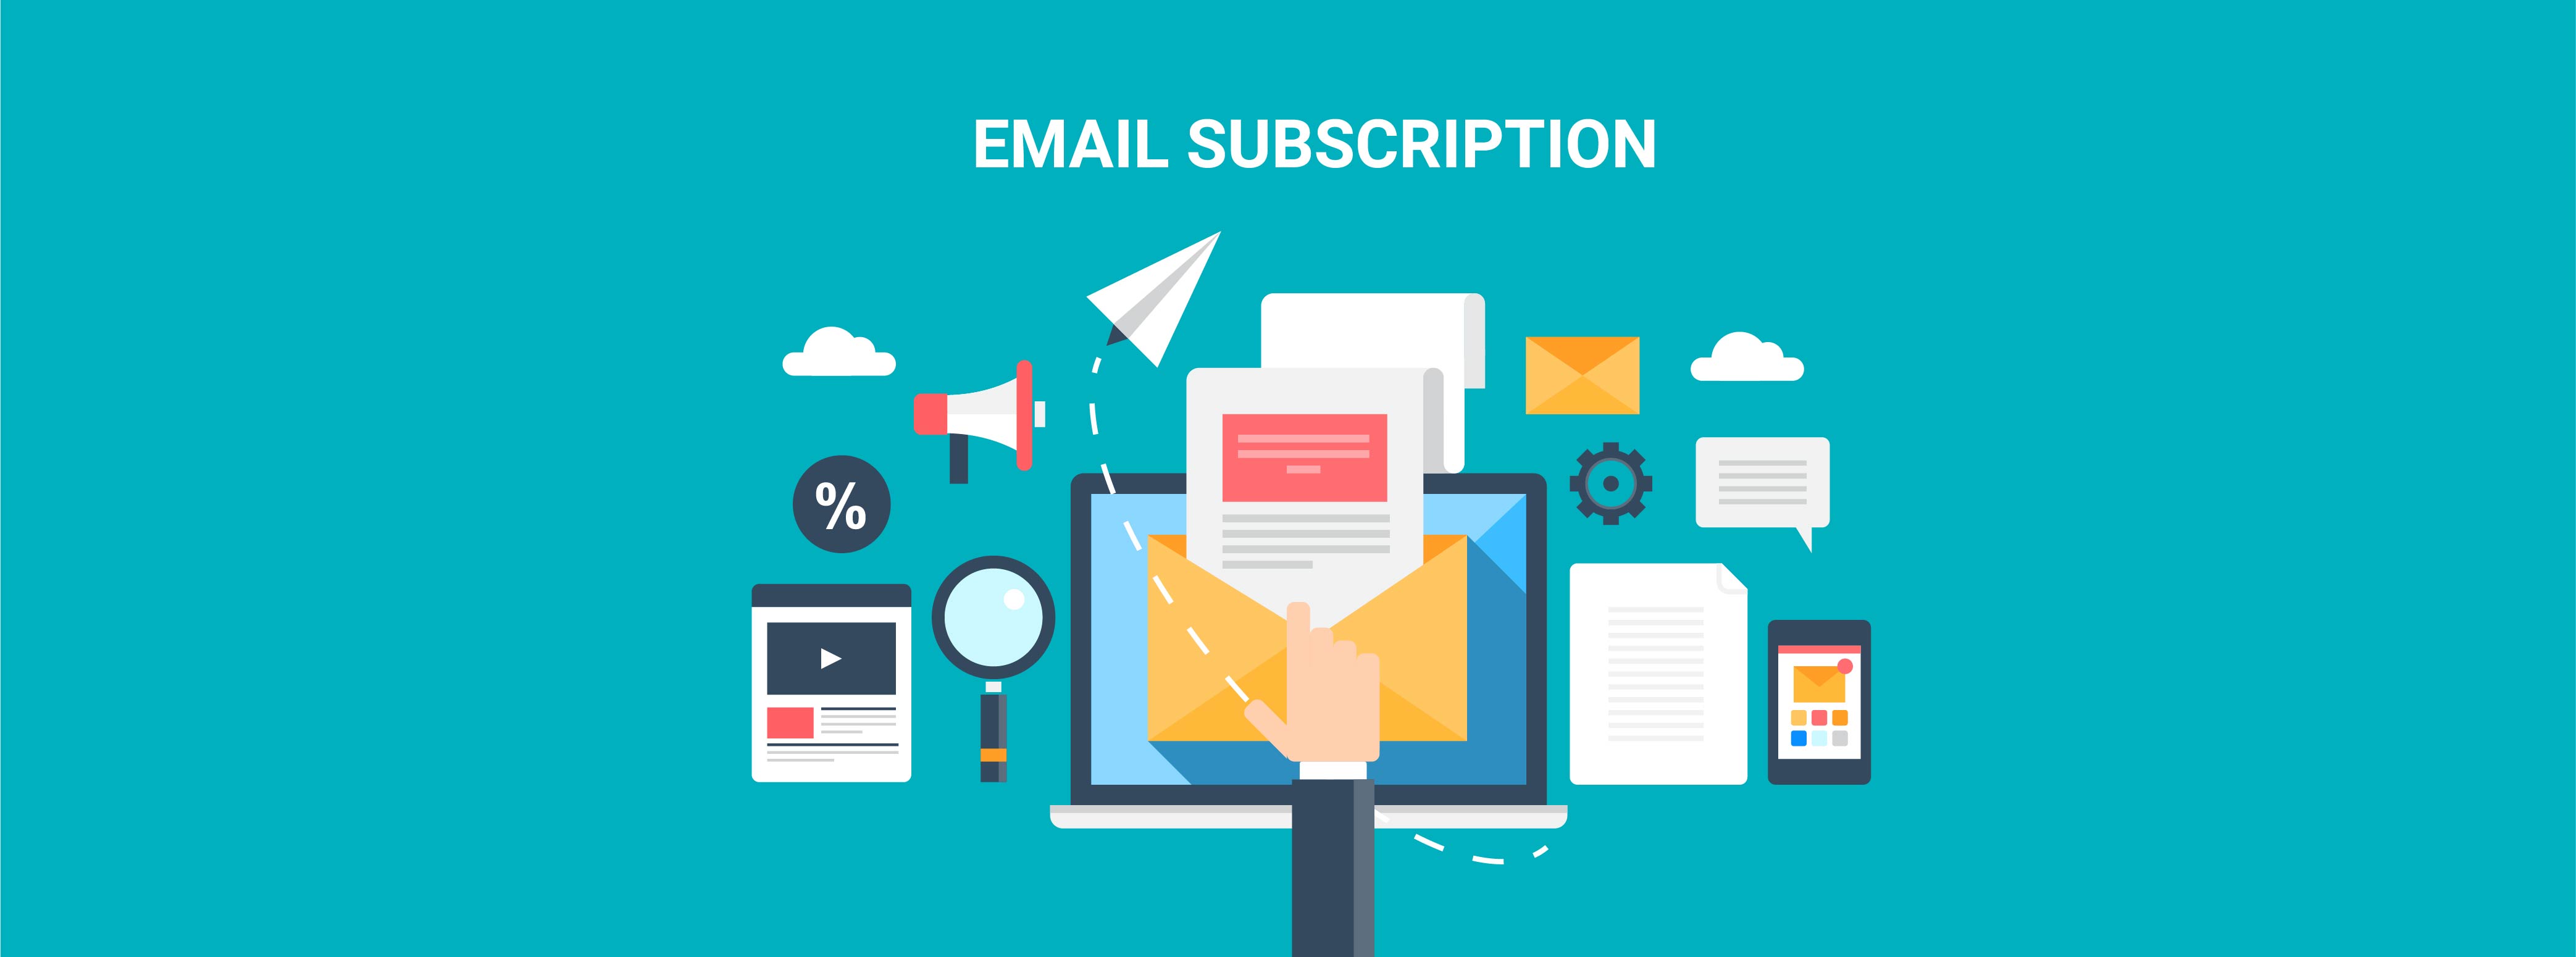 email subscription 